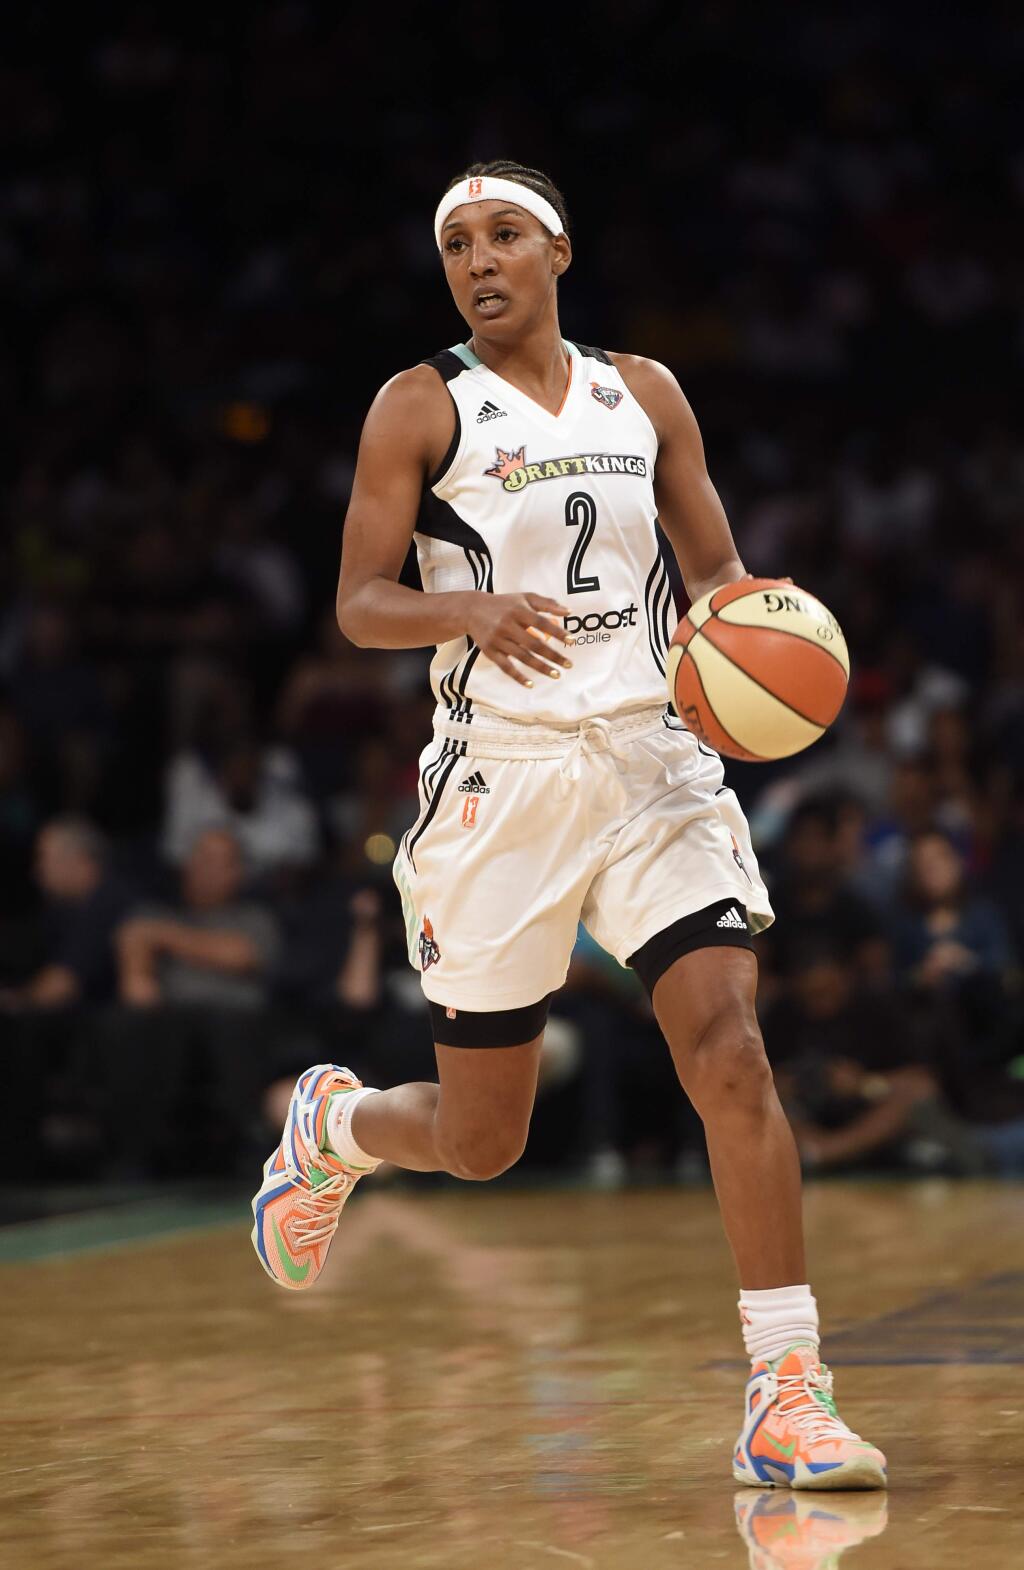 FILE - In this July 16, 2015, file photo, New York Liberty guard Candice Wiggins brings the ball up during the team's WNBA basketball game against the Connecticut Sun in New York. Wiggins said her experience playing in the WNBA was 'toxic' and was a major reason why she retired last season. In an interview with The San Diego Union-Tribune, Wiggins said the culture in the league was 'very, very harmful' and that she was targeted throughout her career for being heterosexual and popular. (AP Photo/Kathy Kmonicek, File)